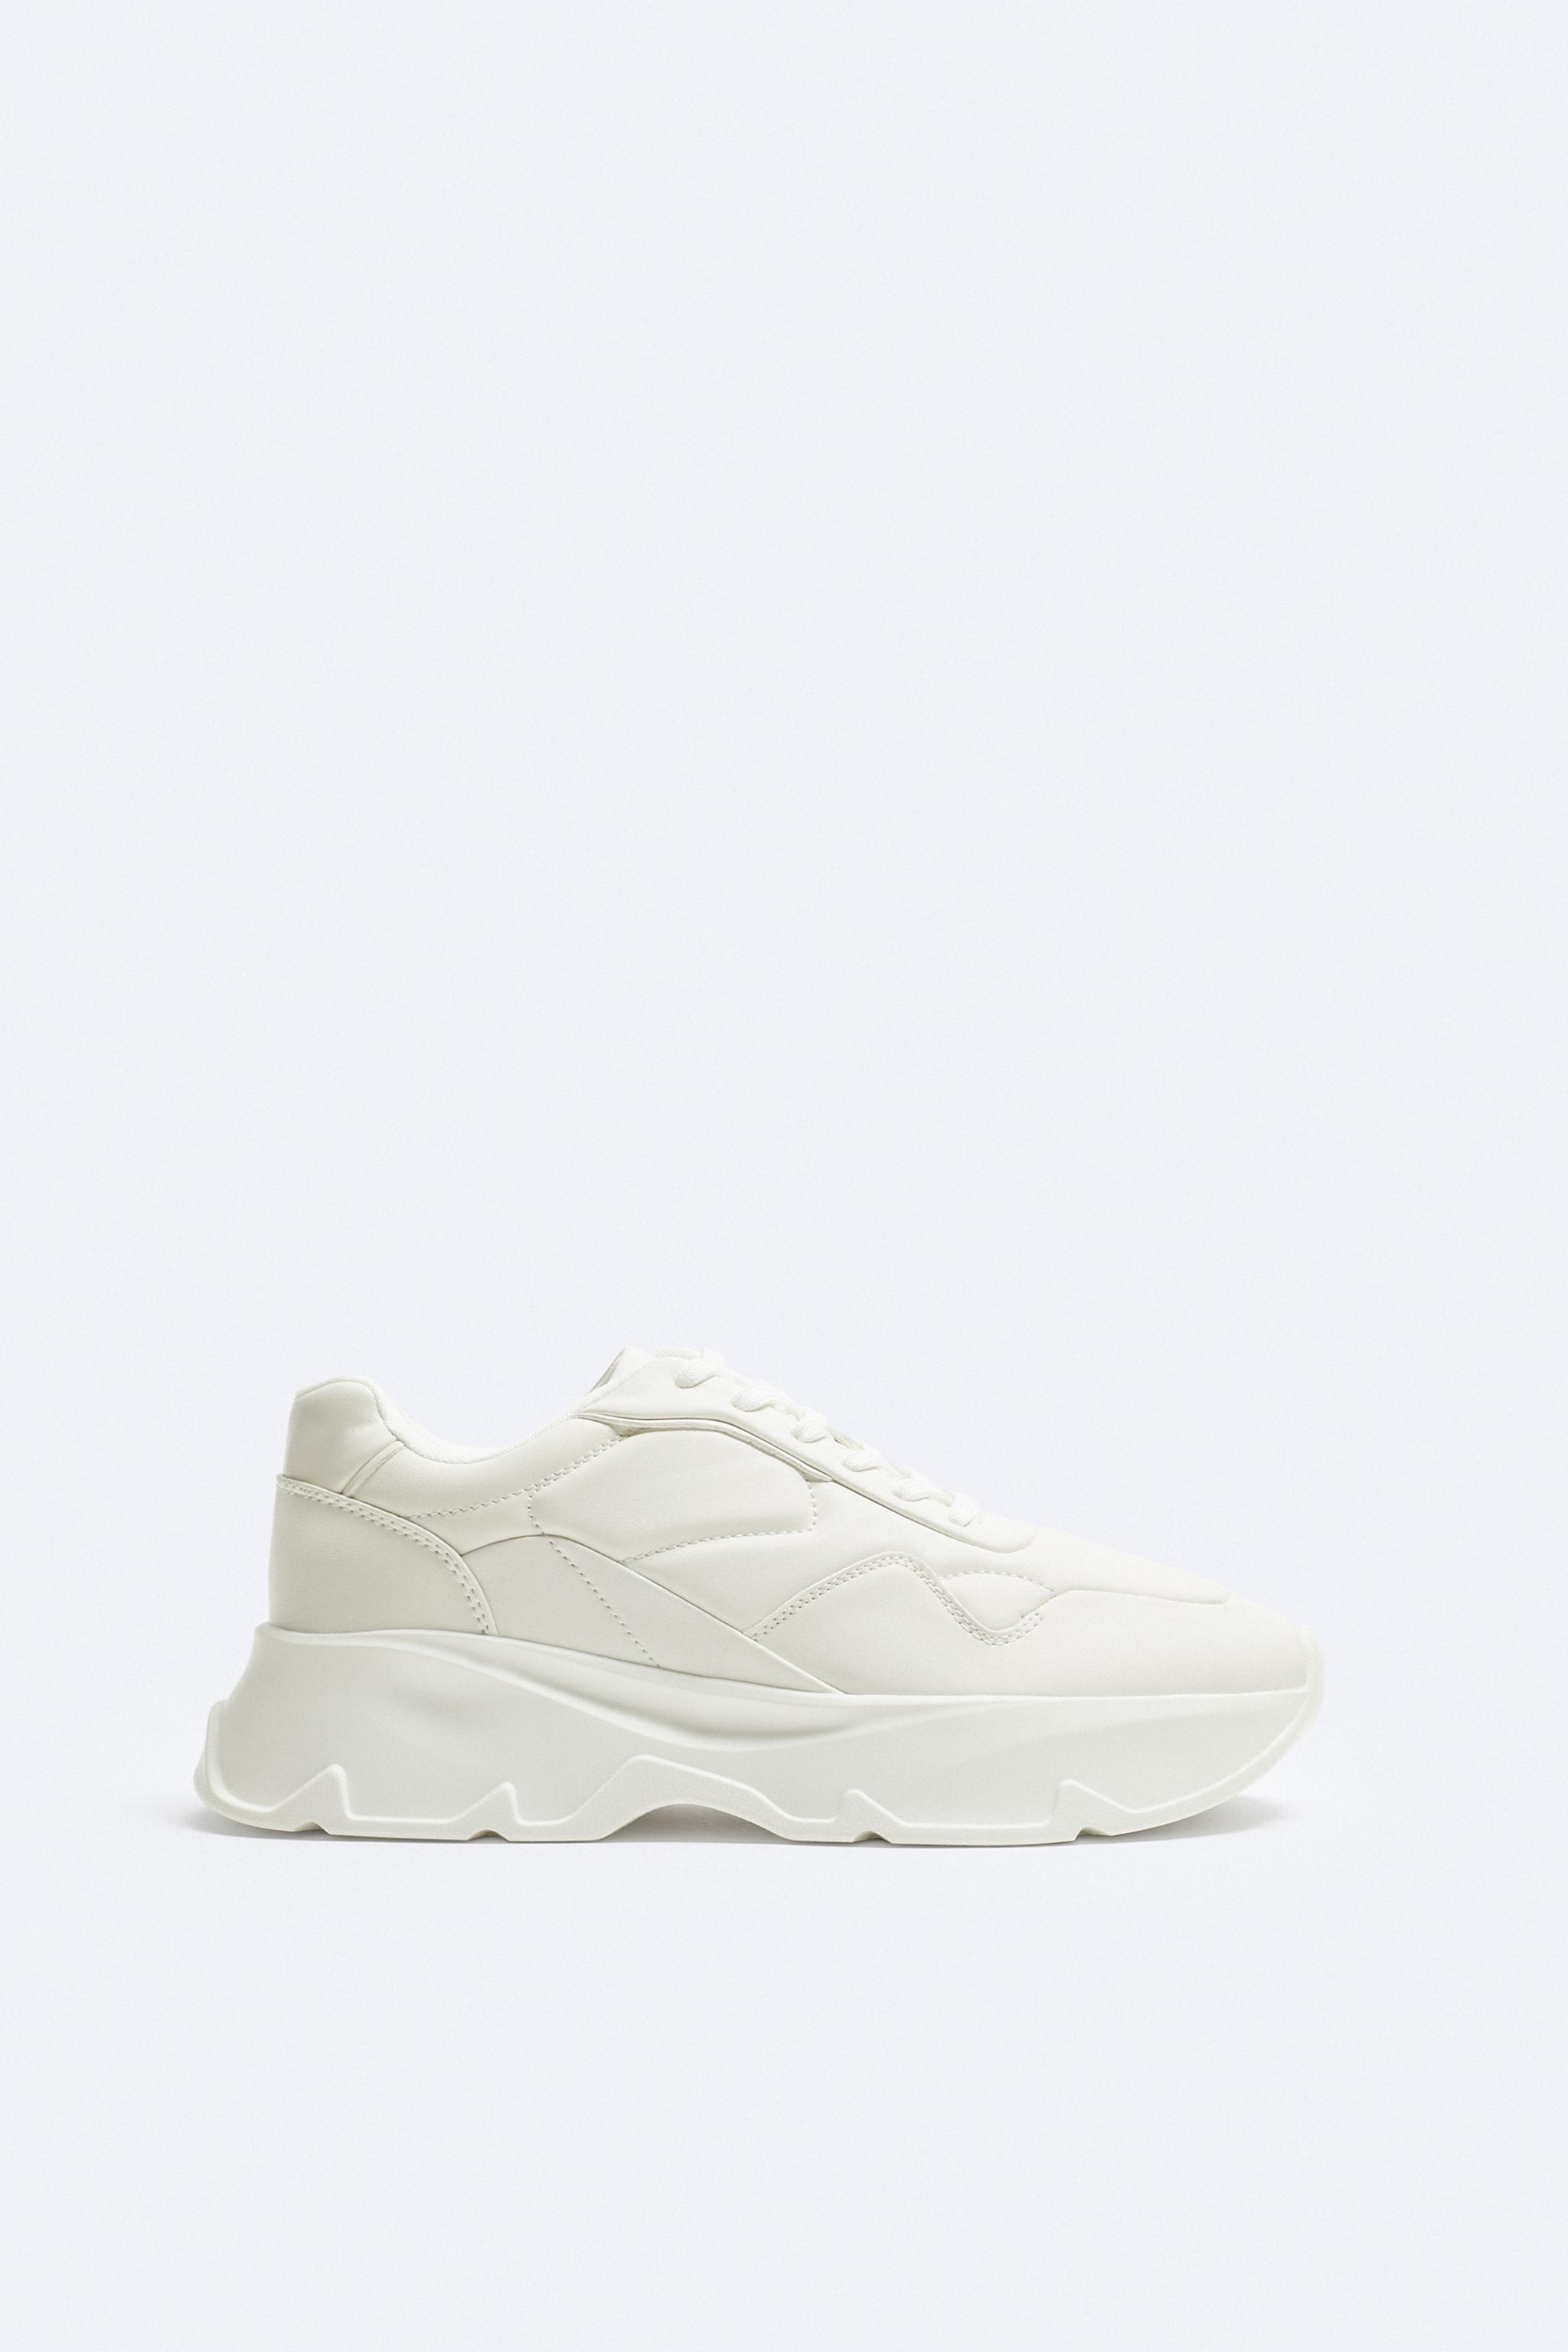 Zara Releases On-Trend Bulky Sneakers — and They're Only $36